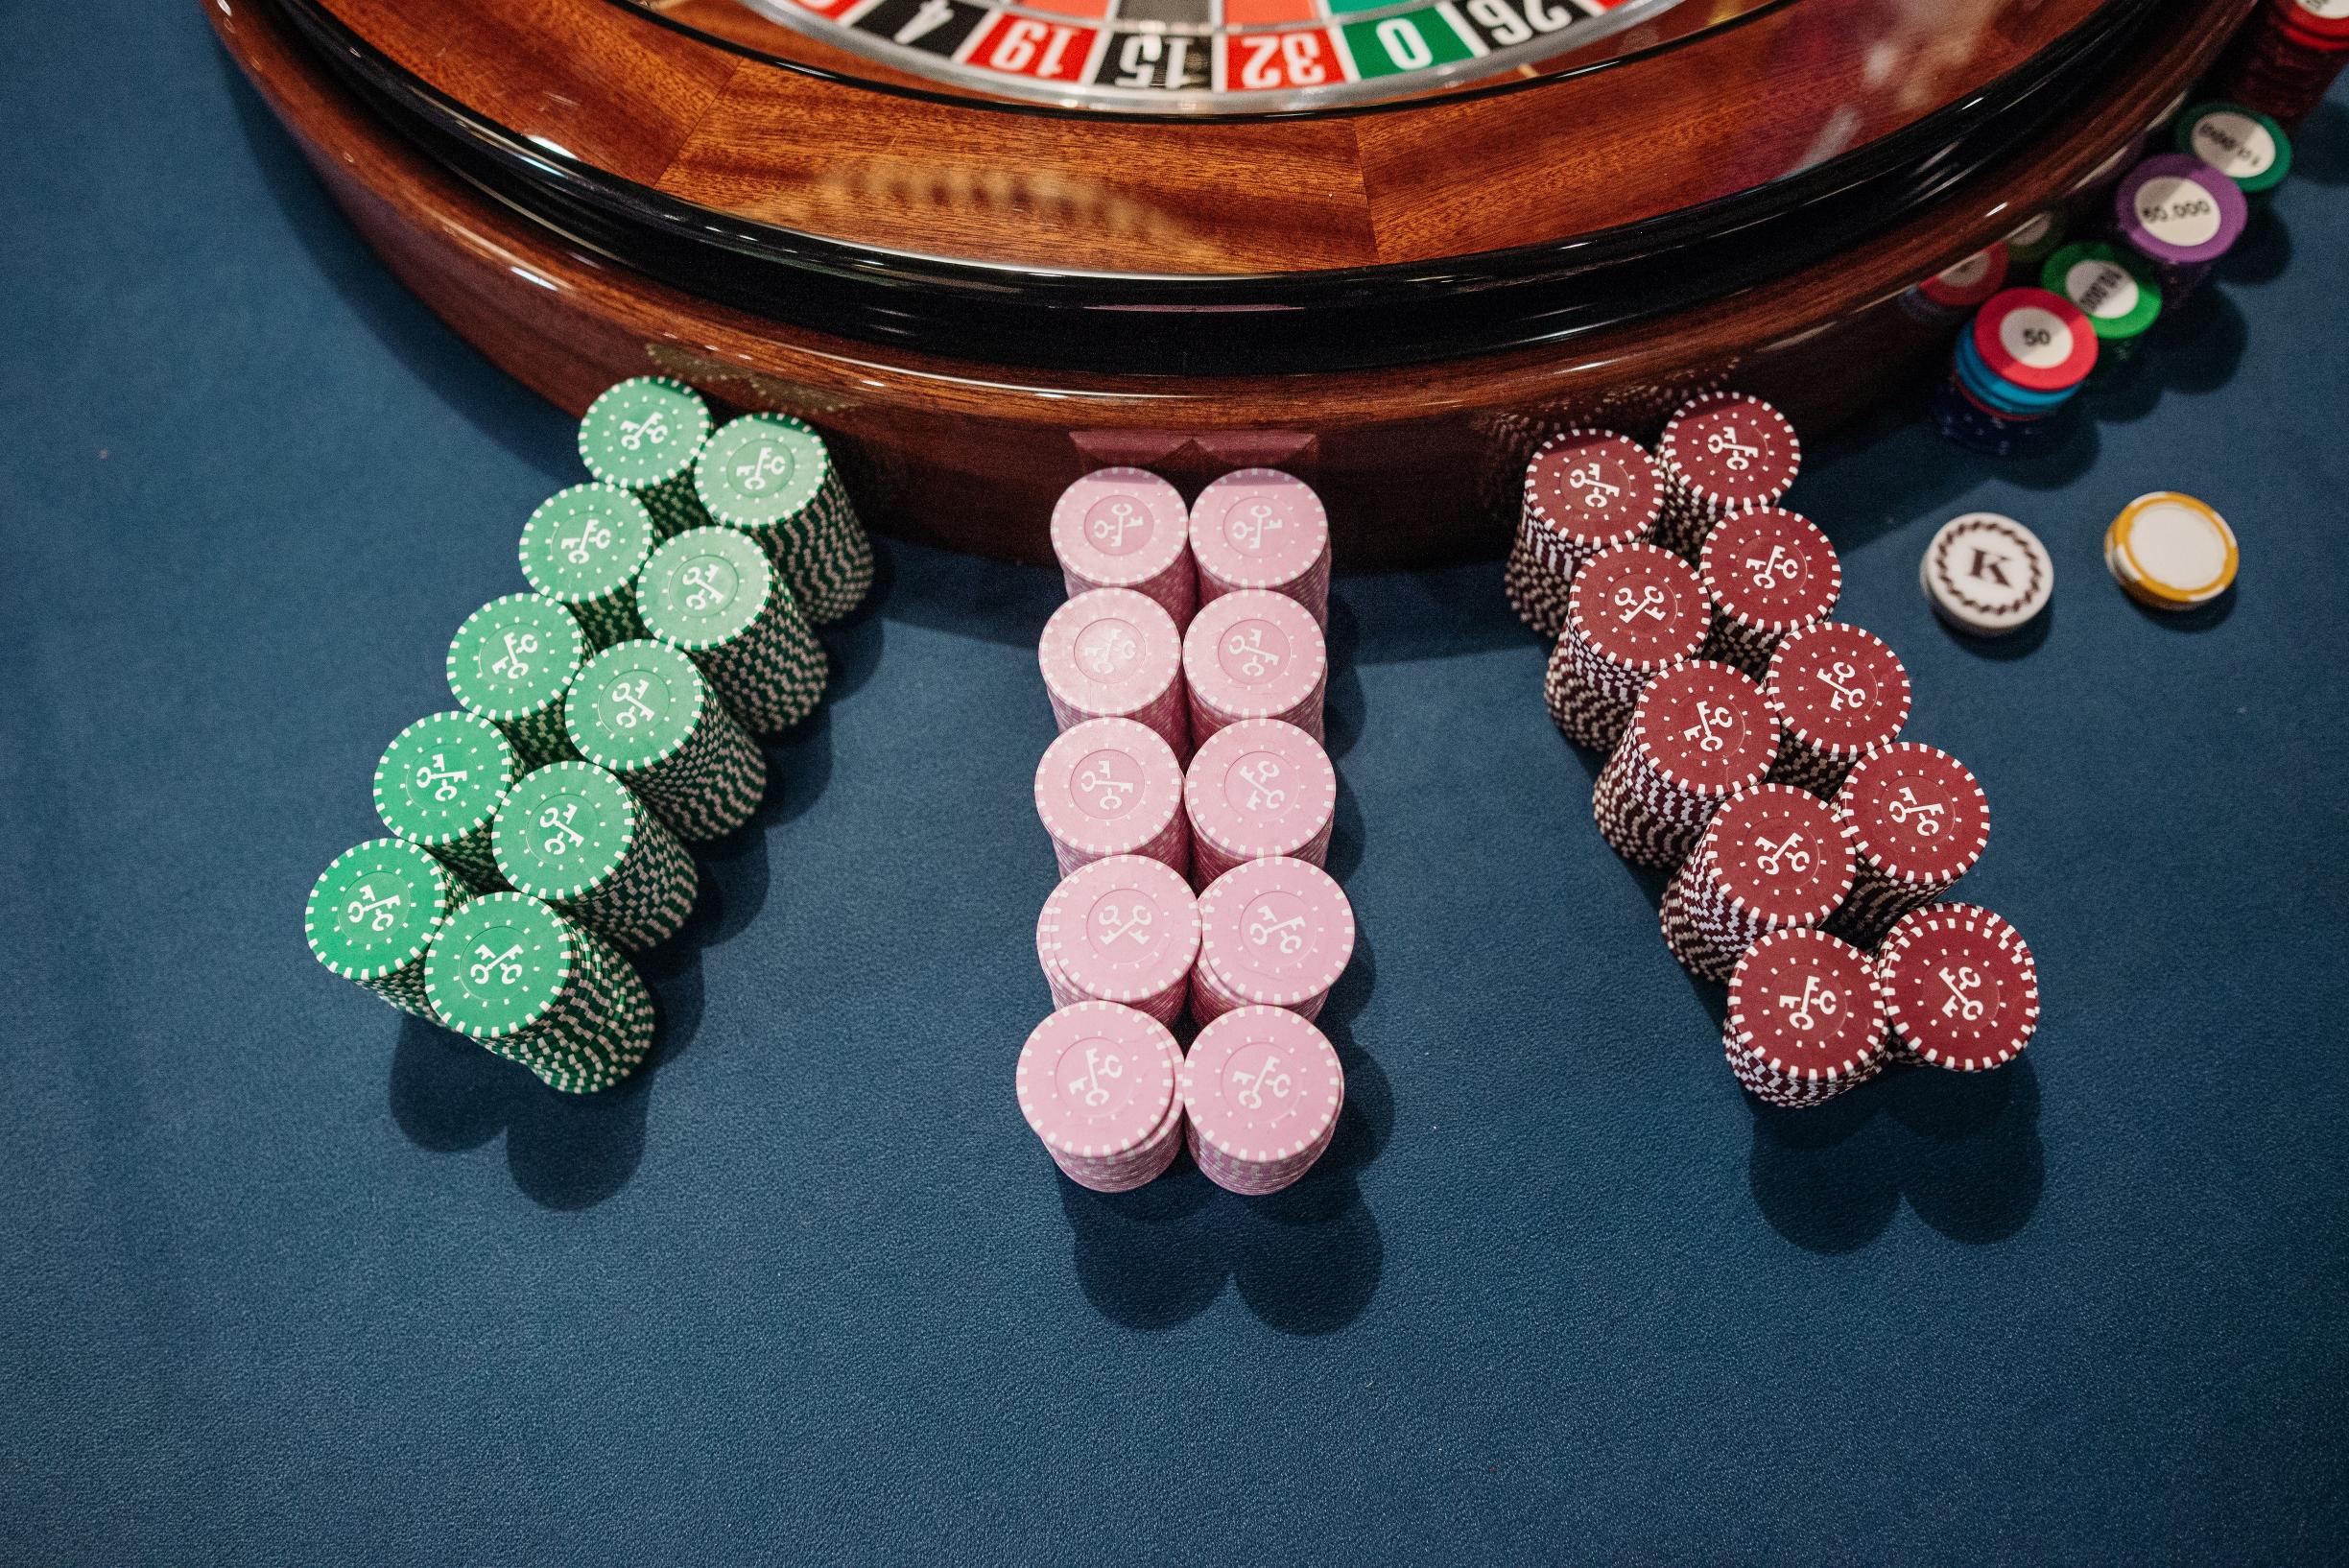 The Economic Impact of Gambling: Can It Be a Positive Force for Growth?